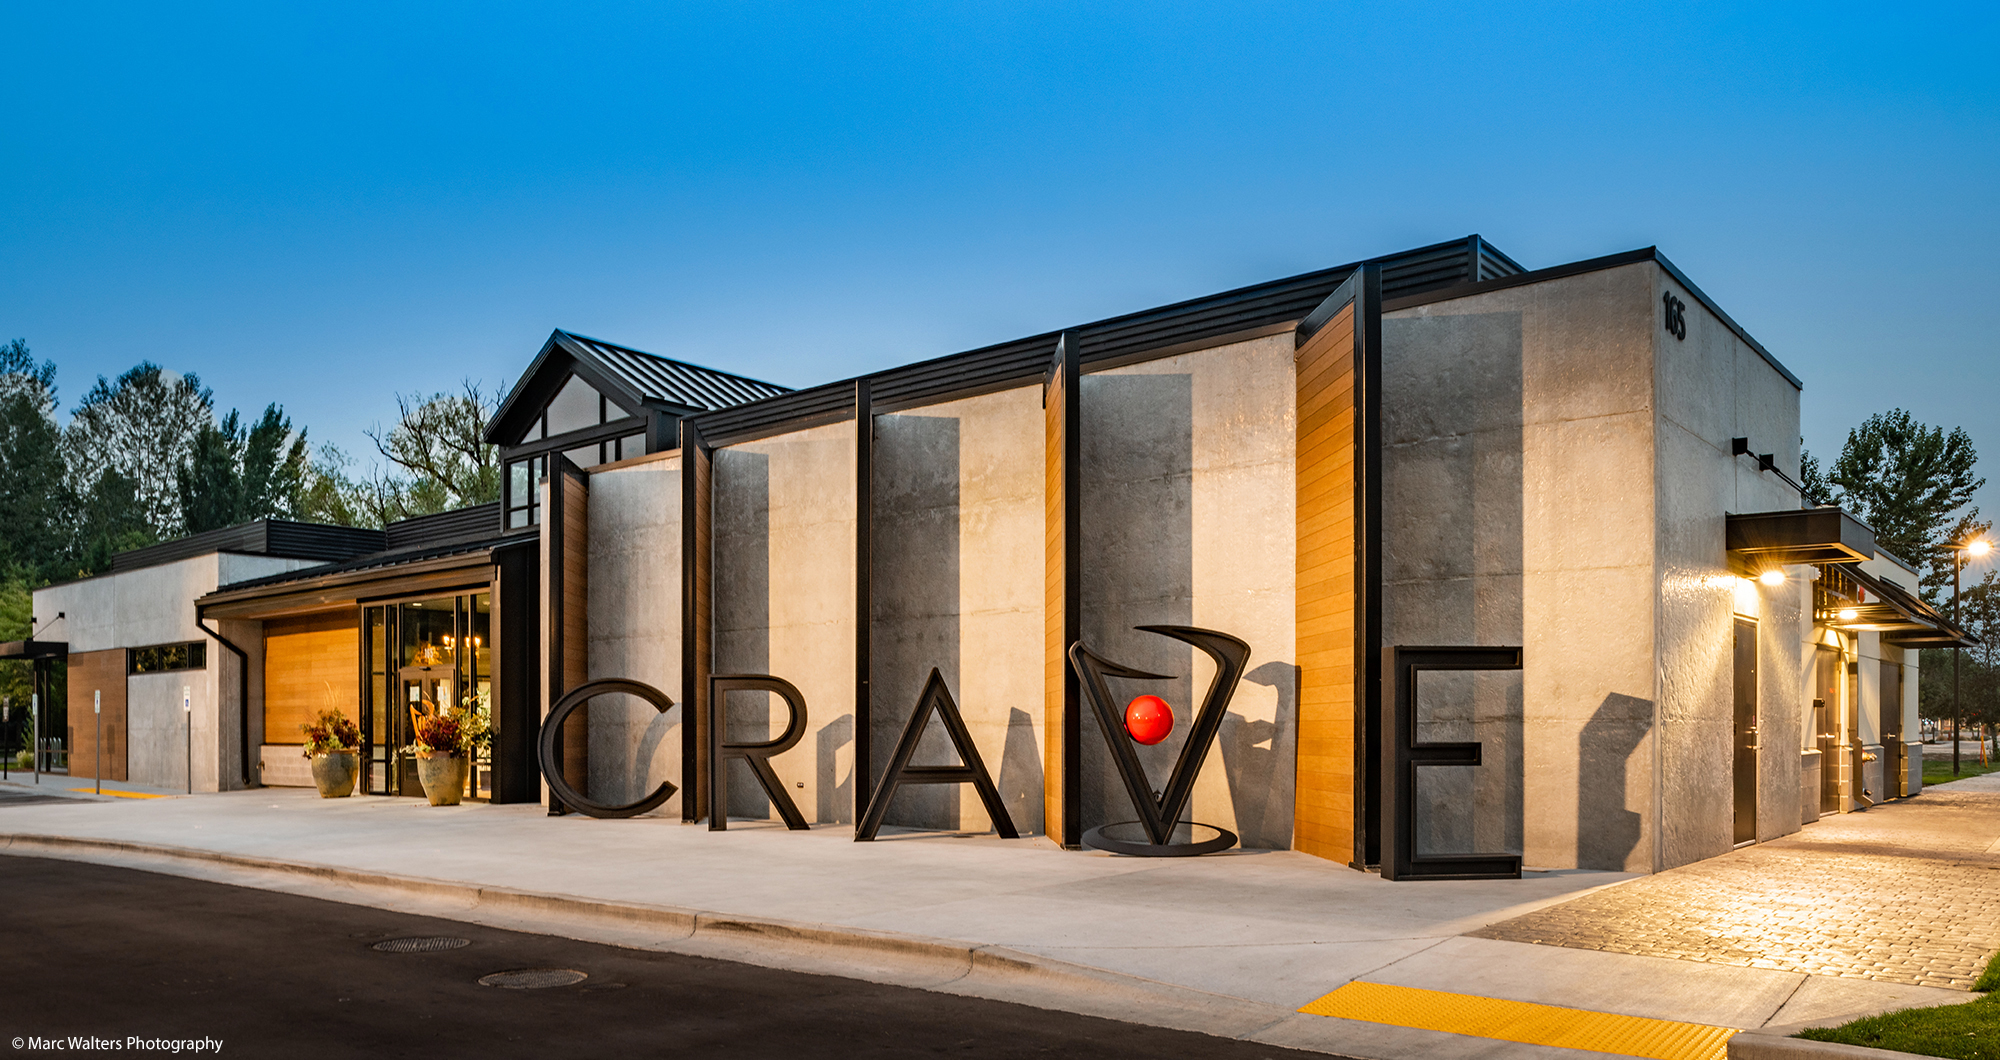 Crave Kitchen and Bar